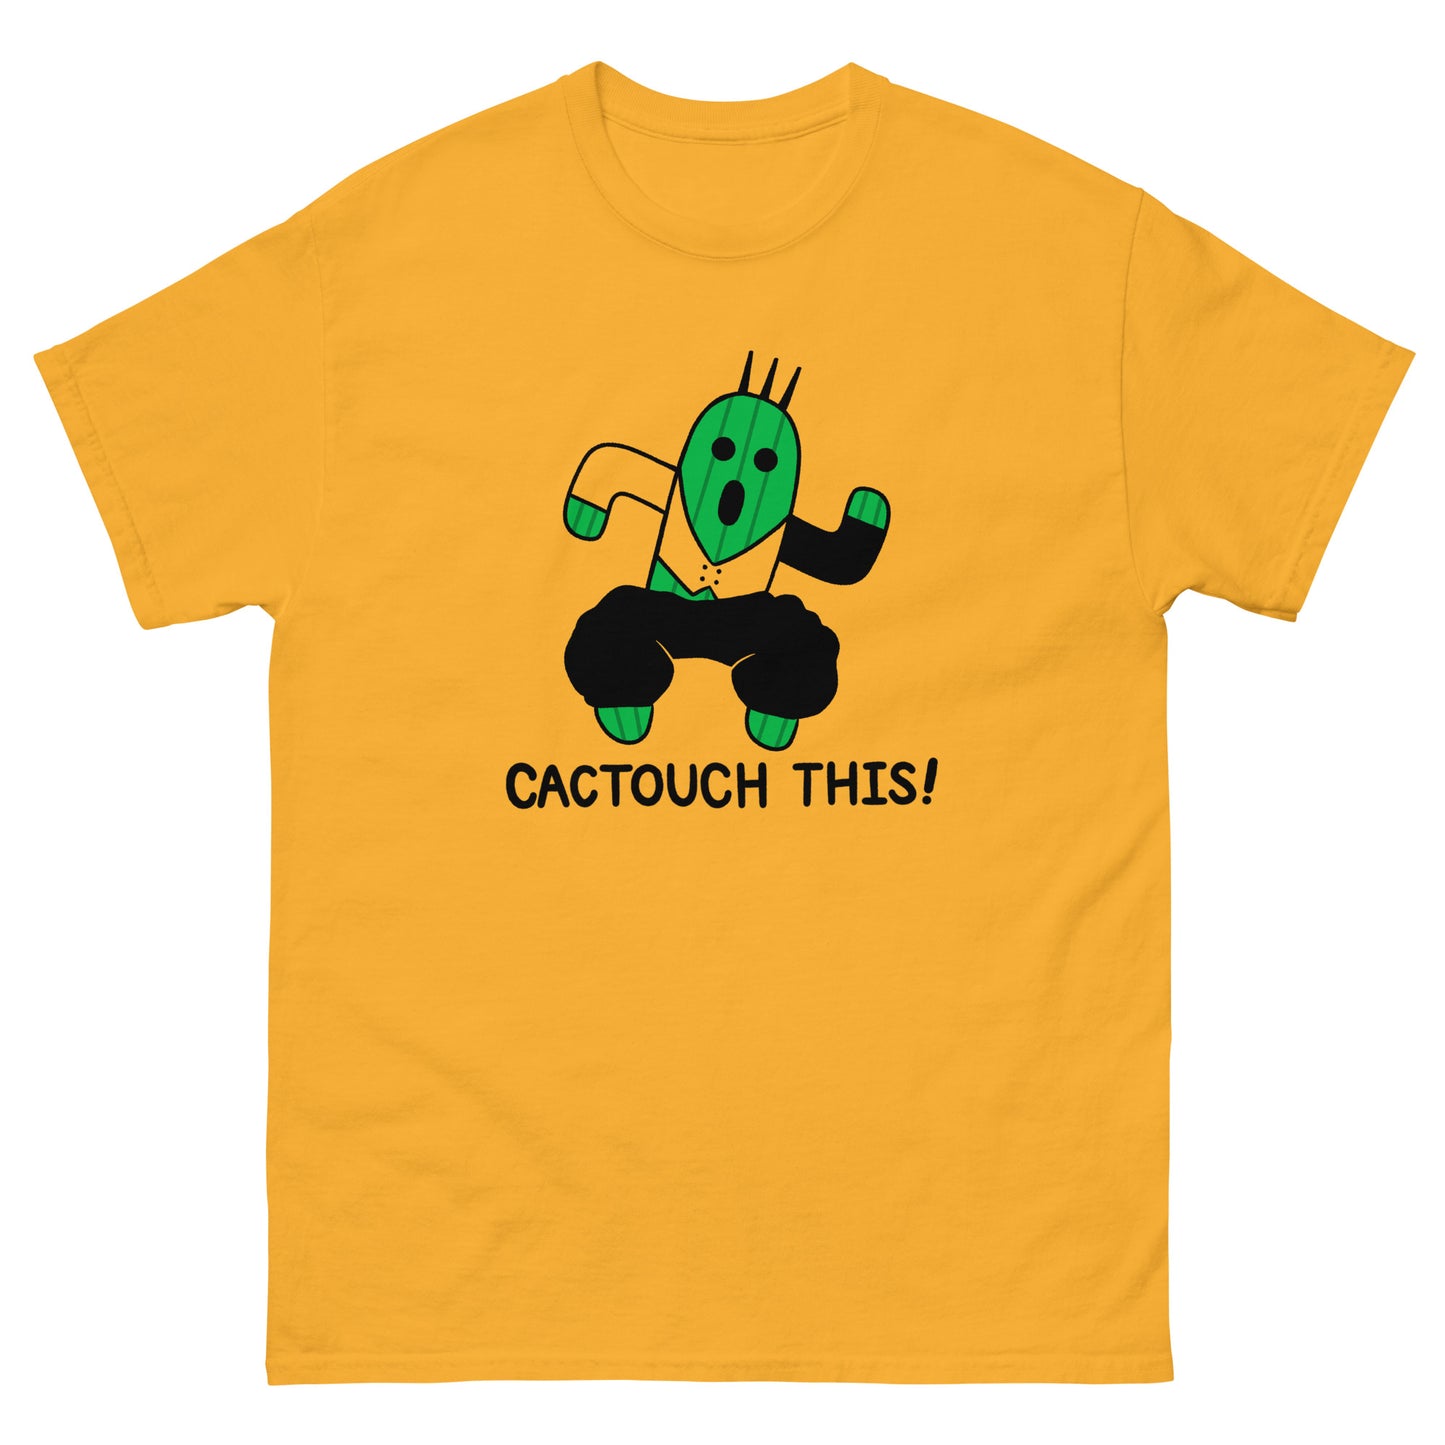 Cactouch This! - 90s Final Fantasy Mashup Cool Gaming T-Shirt